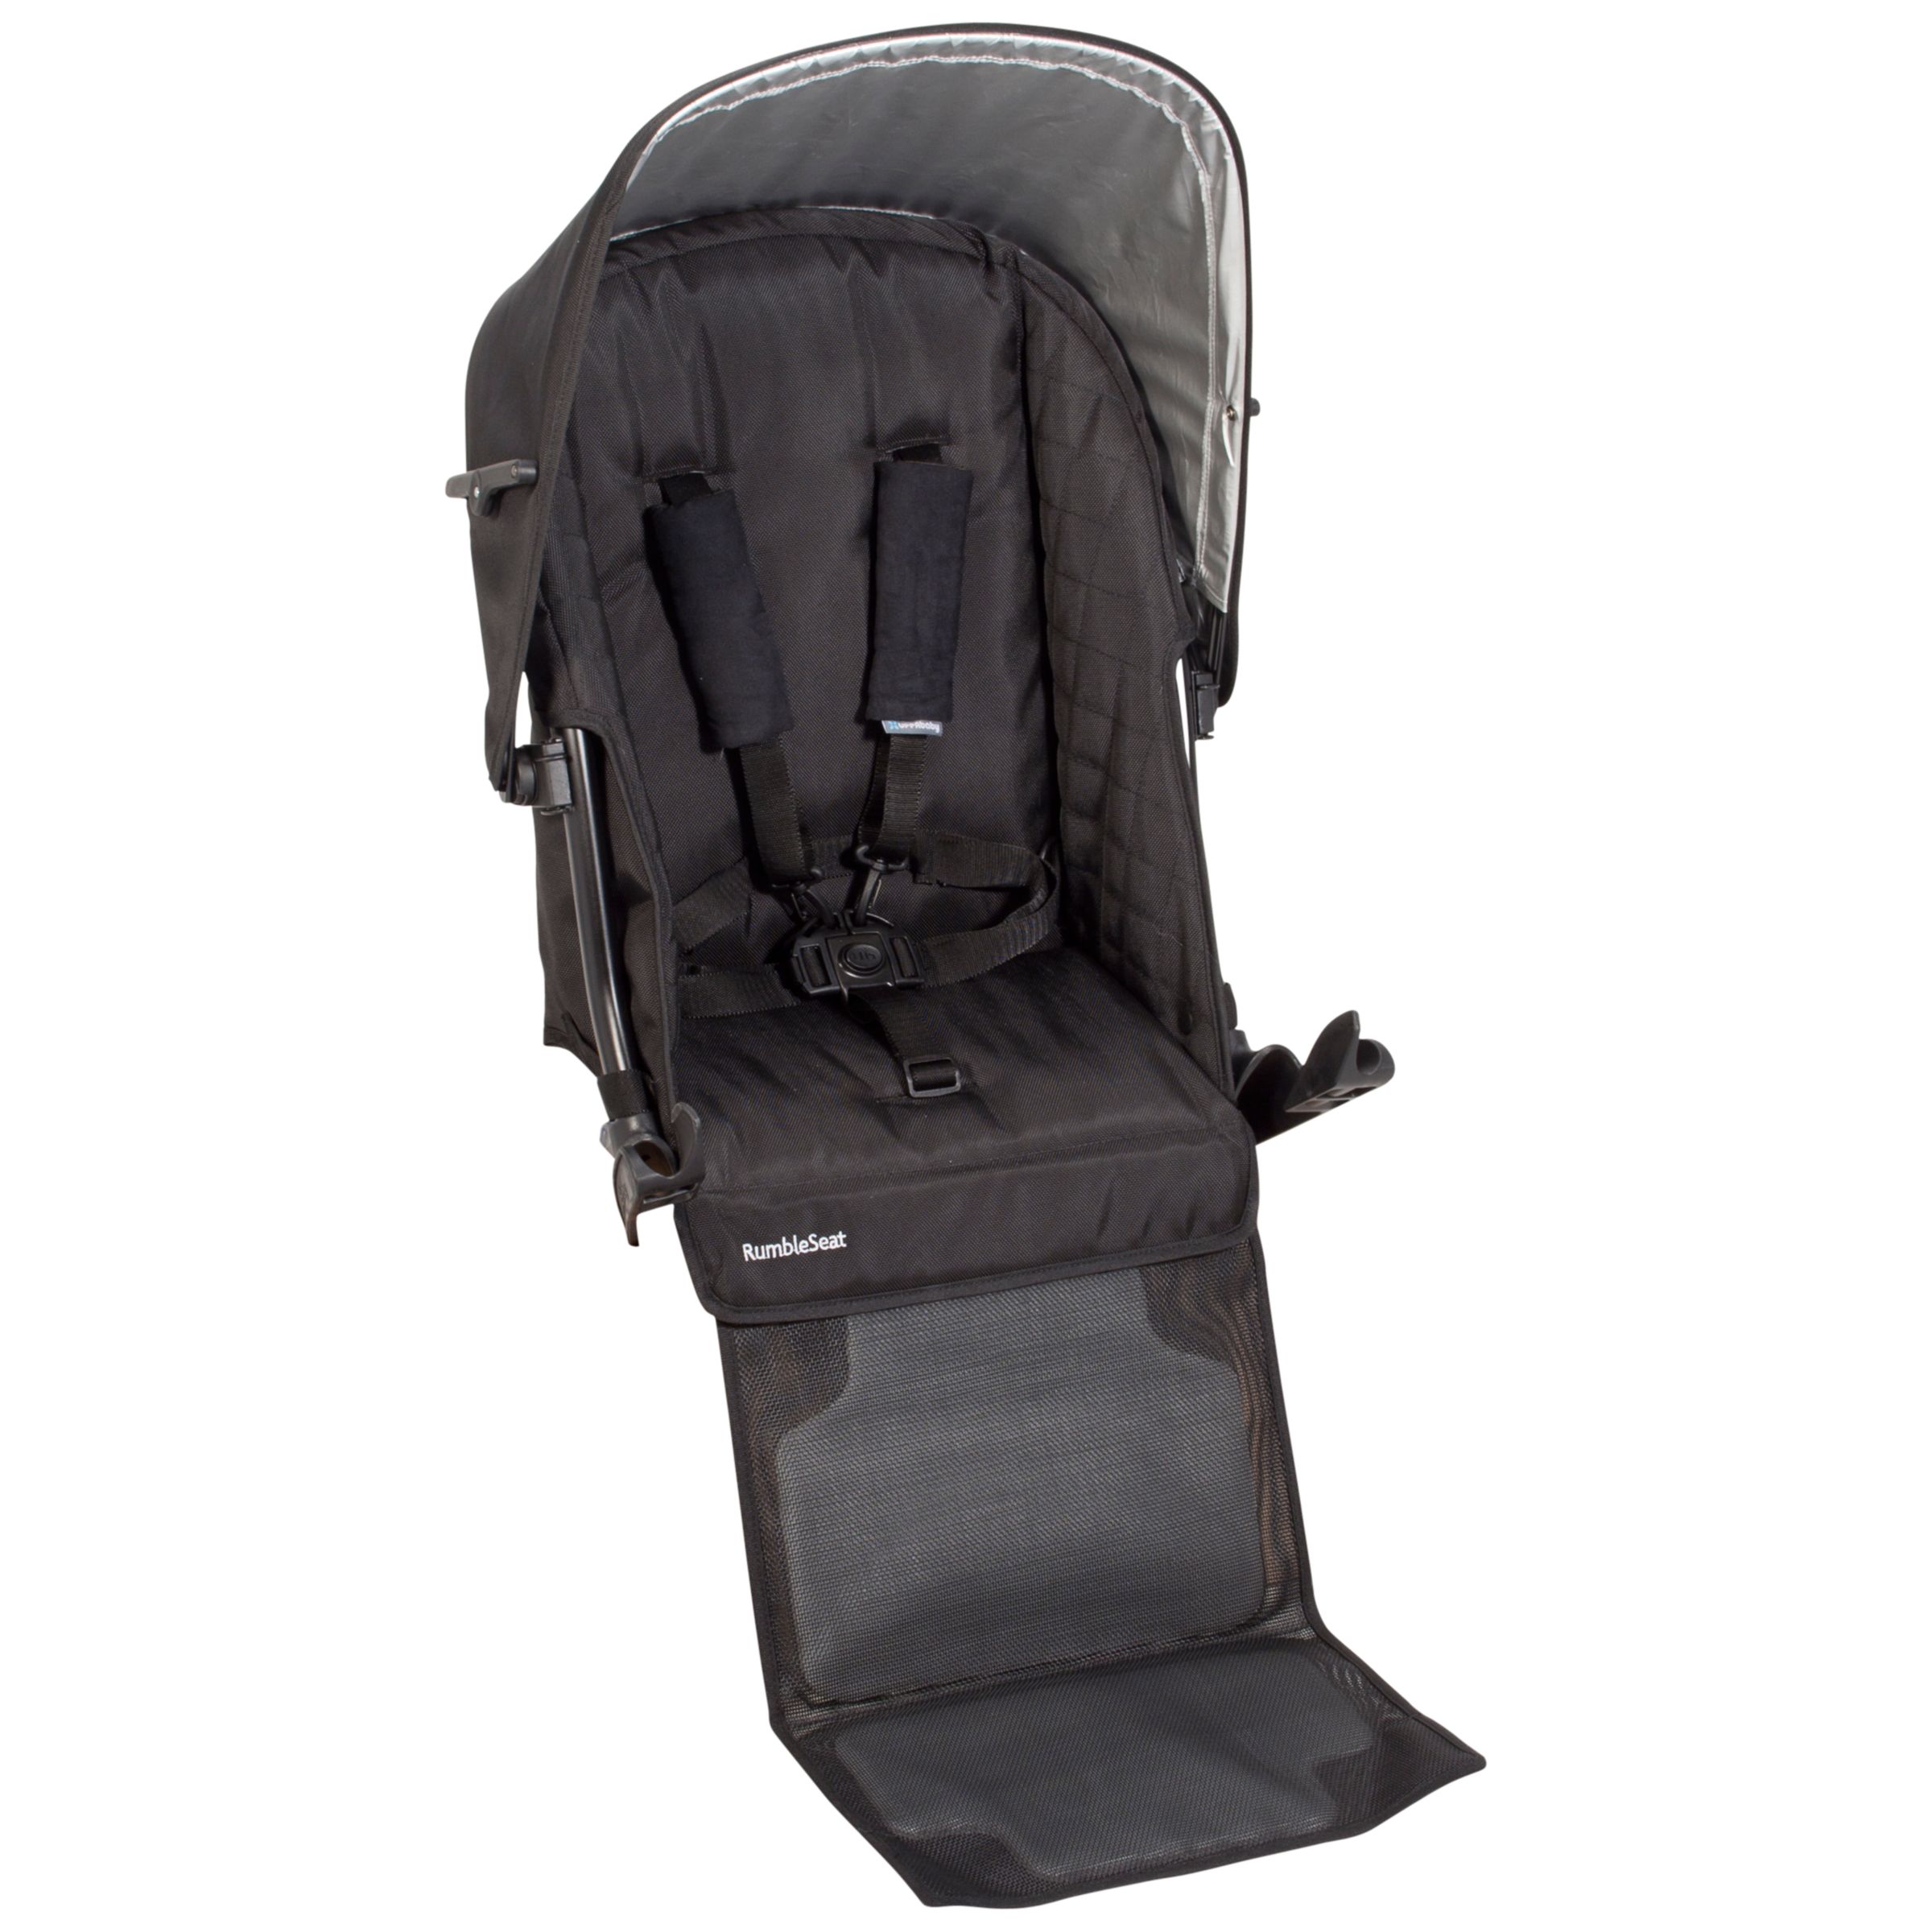 Image of UPPAbaby Rumble Vista Second Seat Black